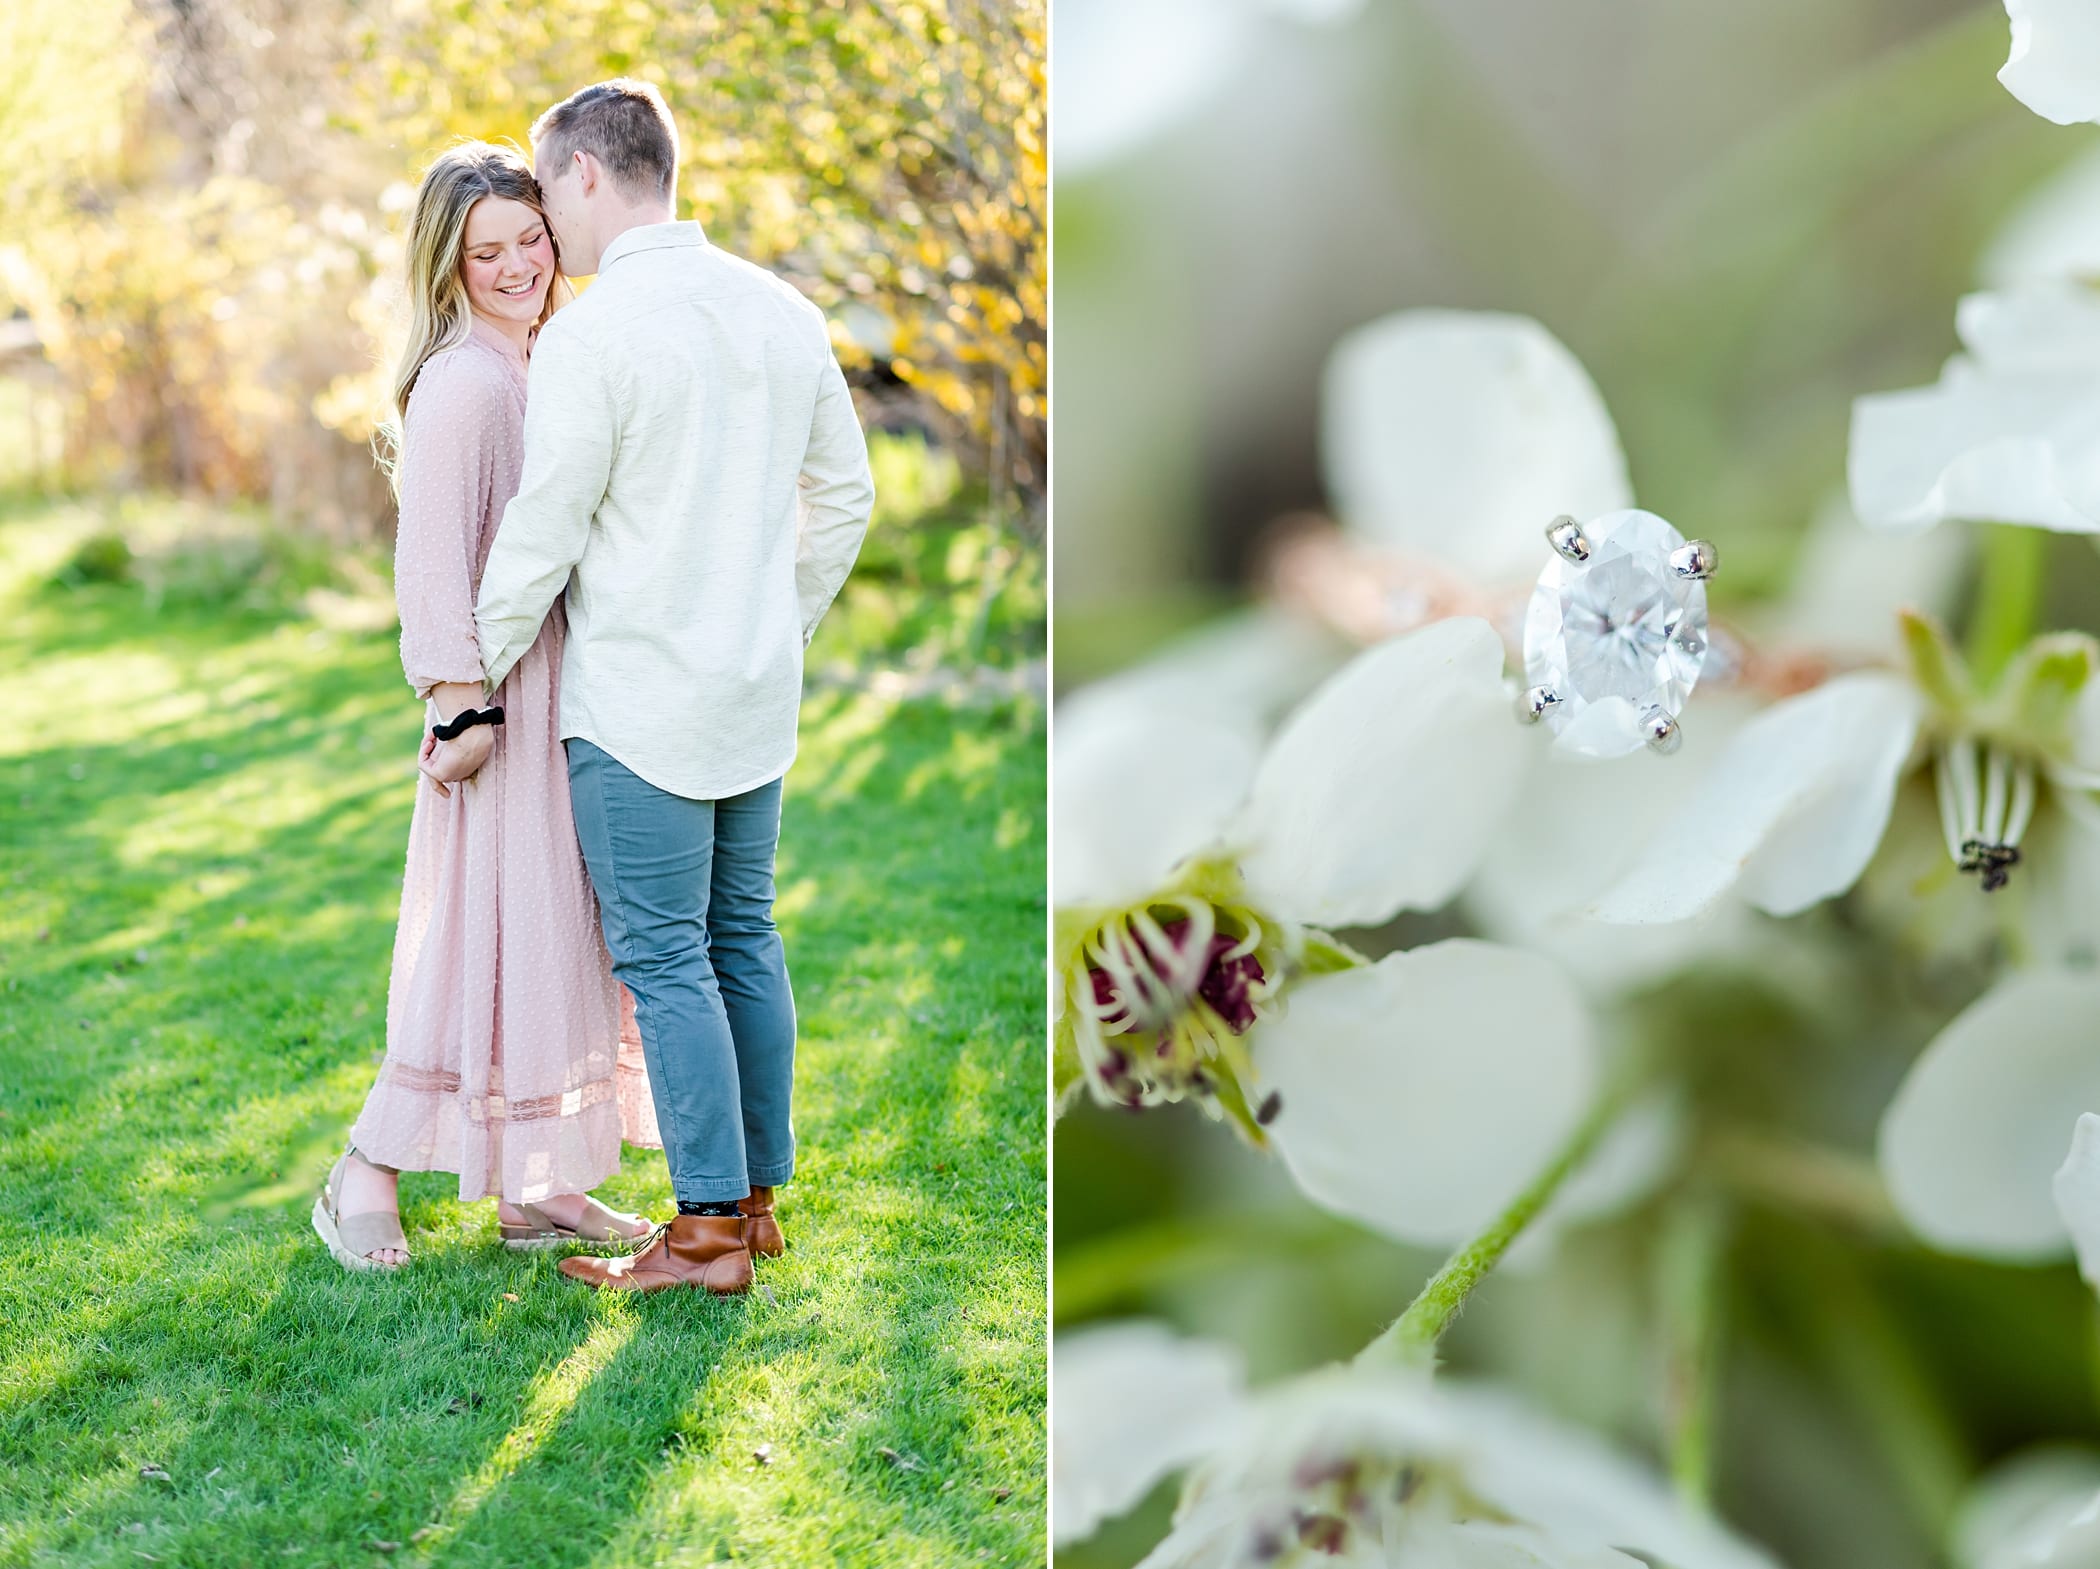 Blossom spring engagements in blush dress and button up shirt at Boise Idaho